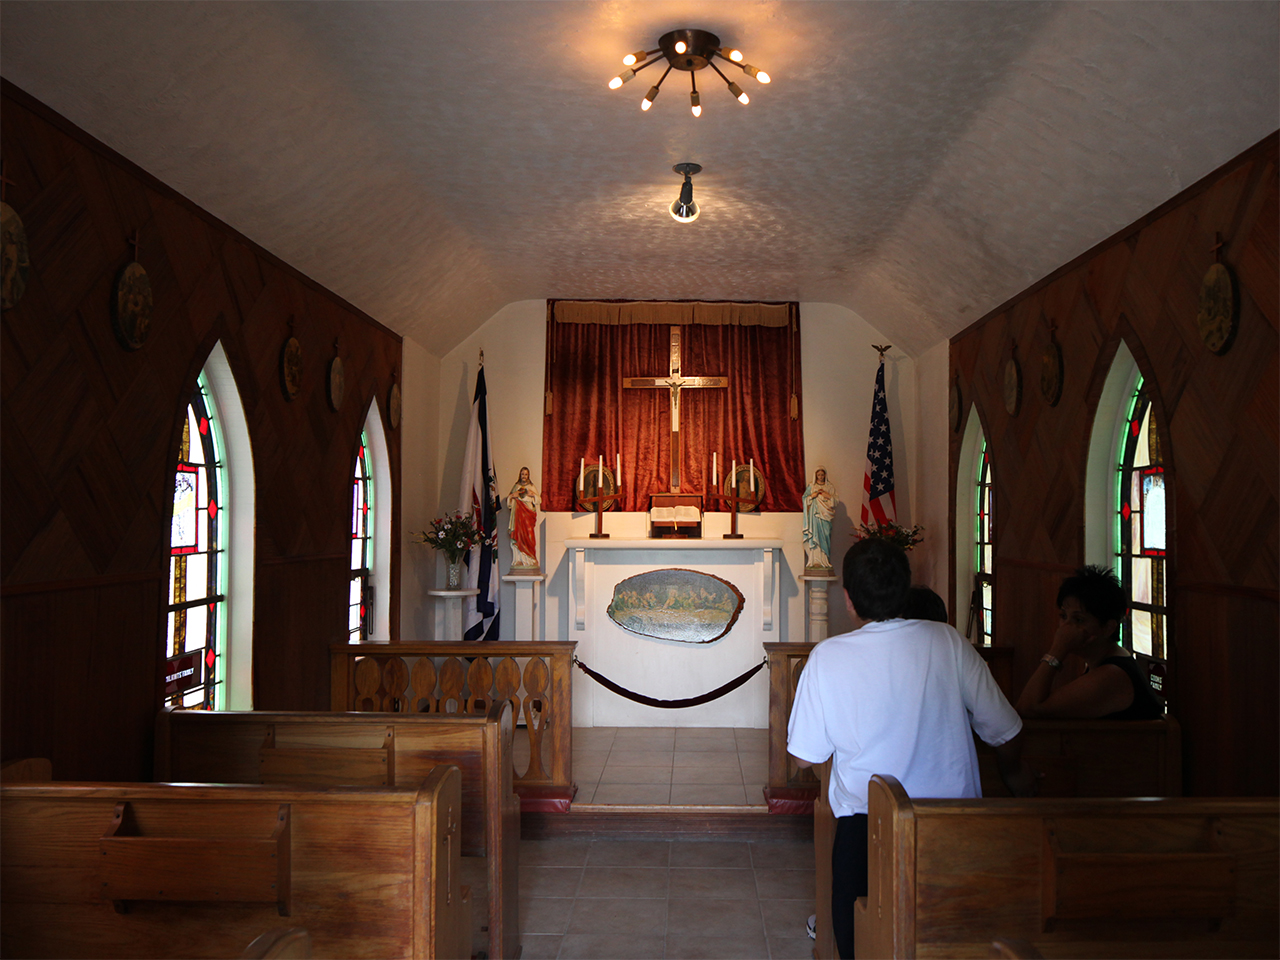 Our Lady of the Pines, Smallest Church in 48 States